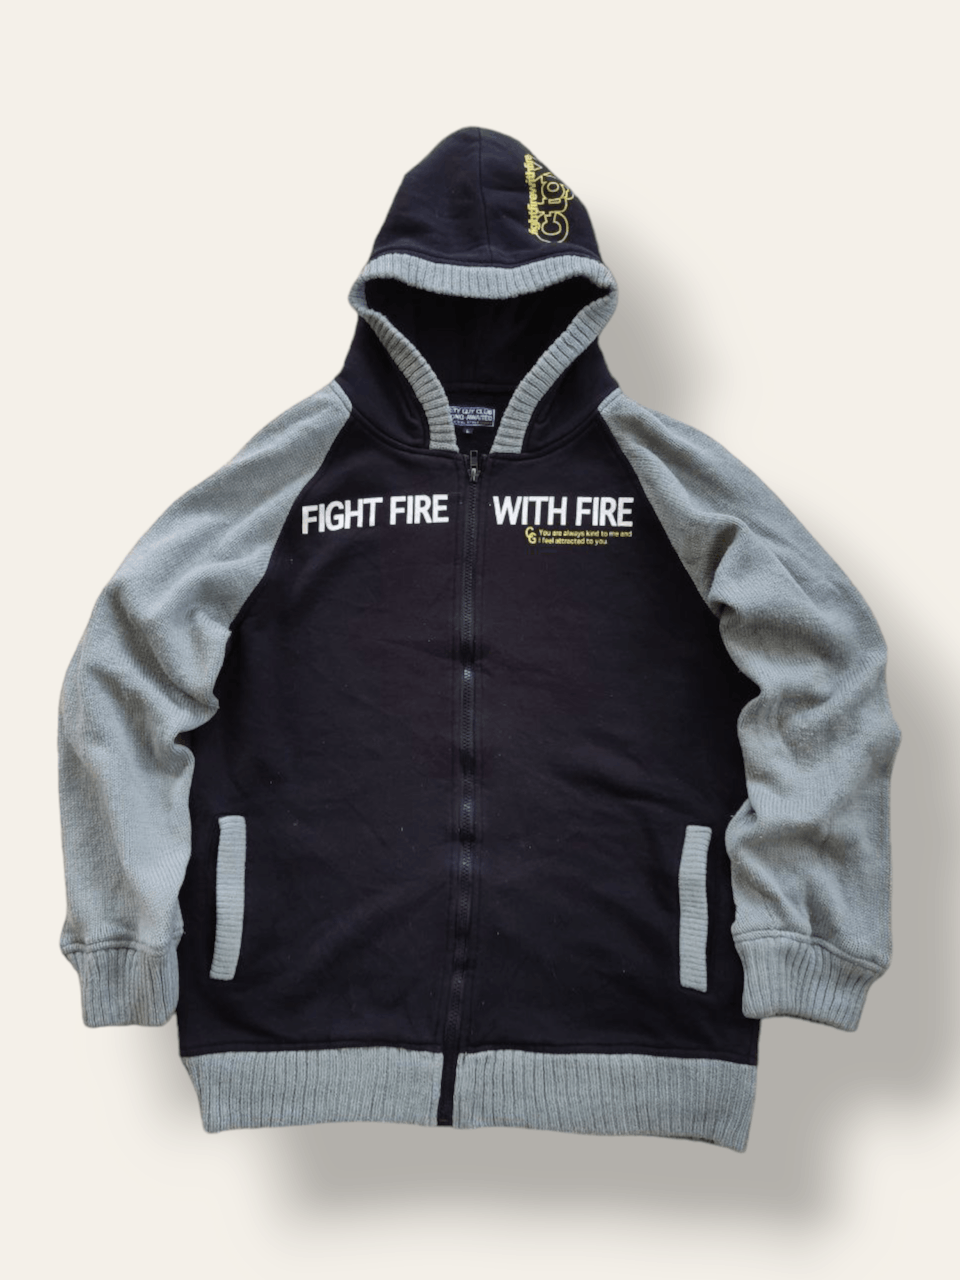 Archival Clothing - CTGY Fight Fire With Fire Varsity Knitted Zipper Hoodie - 1